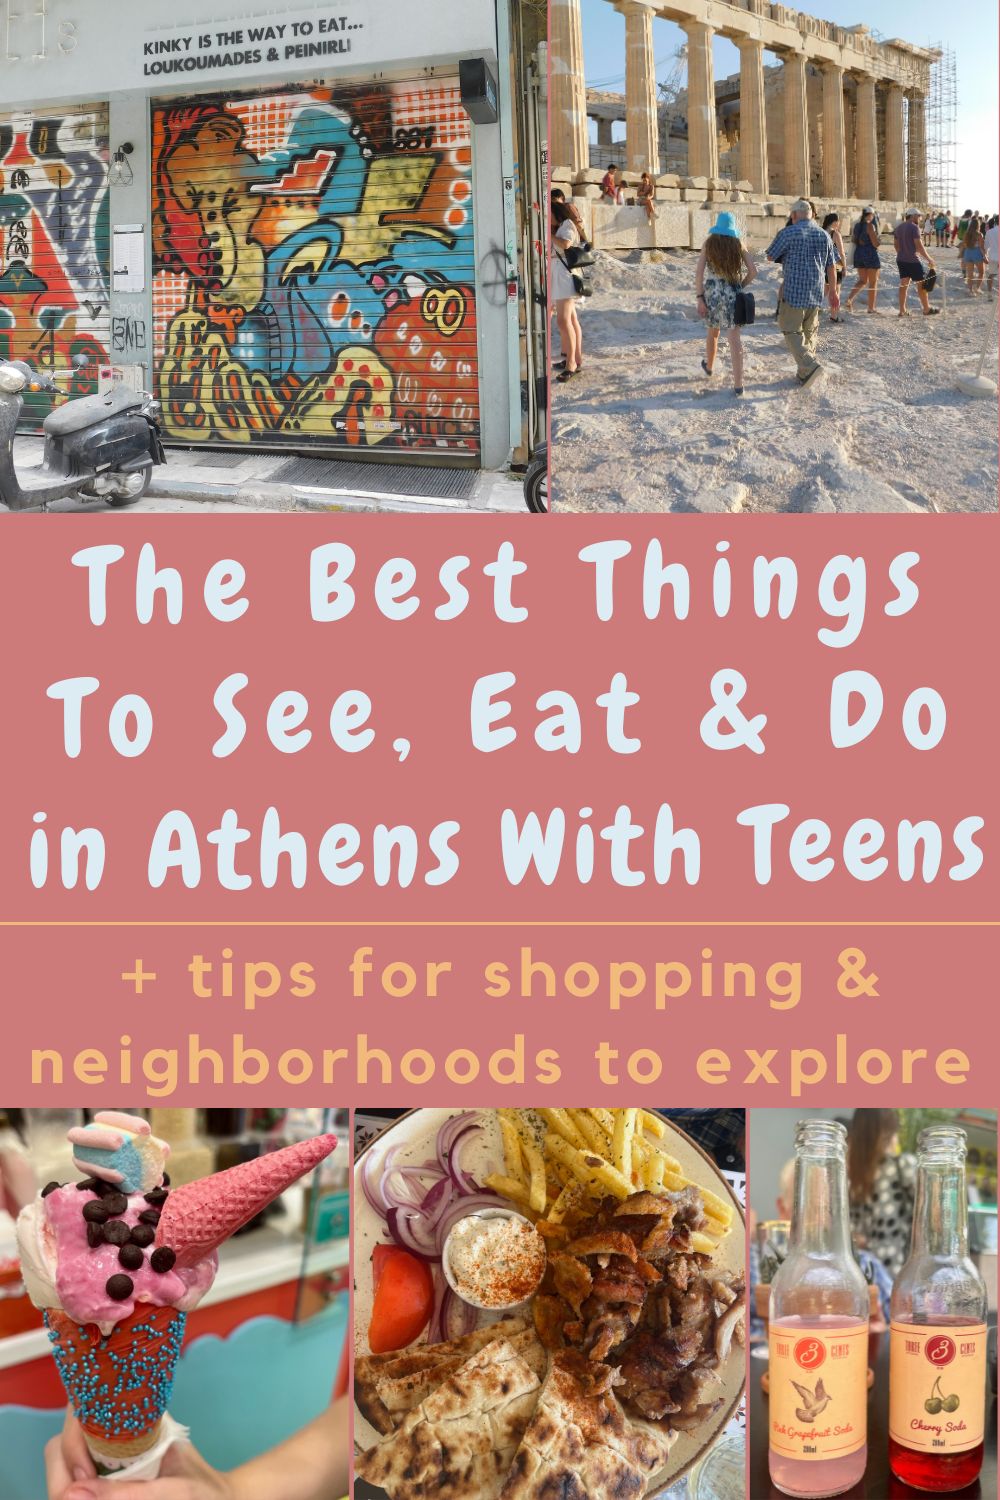 here are top things to do in athens with teens & kids, including fun neighborhoods, cool shopping & good ice cream to intersperse with the ruins and museums.